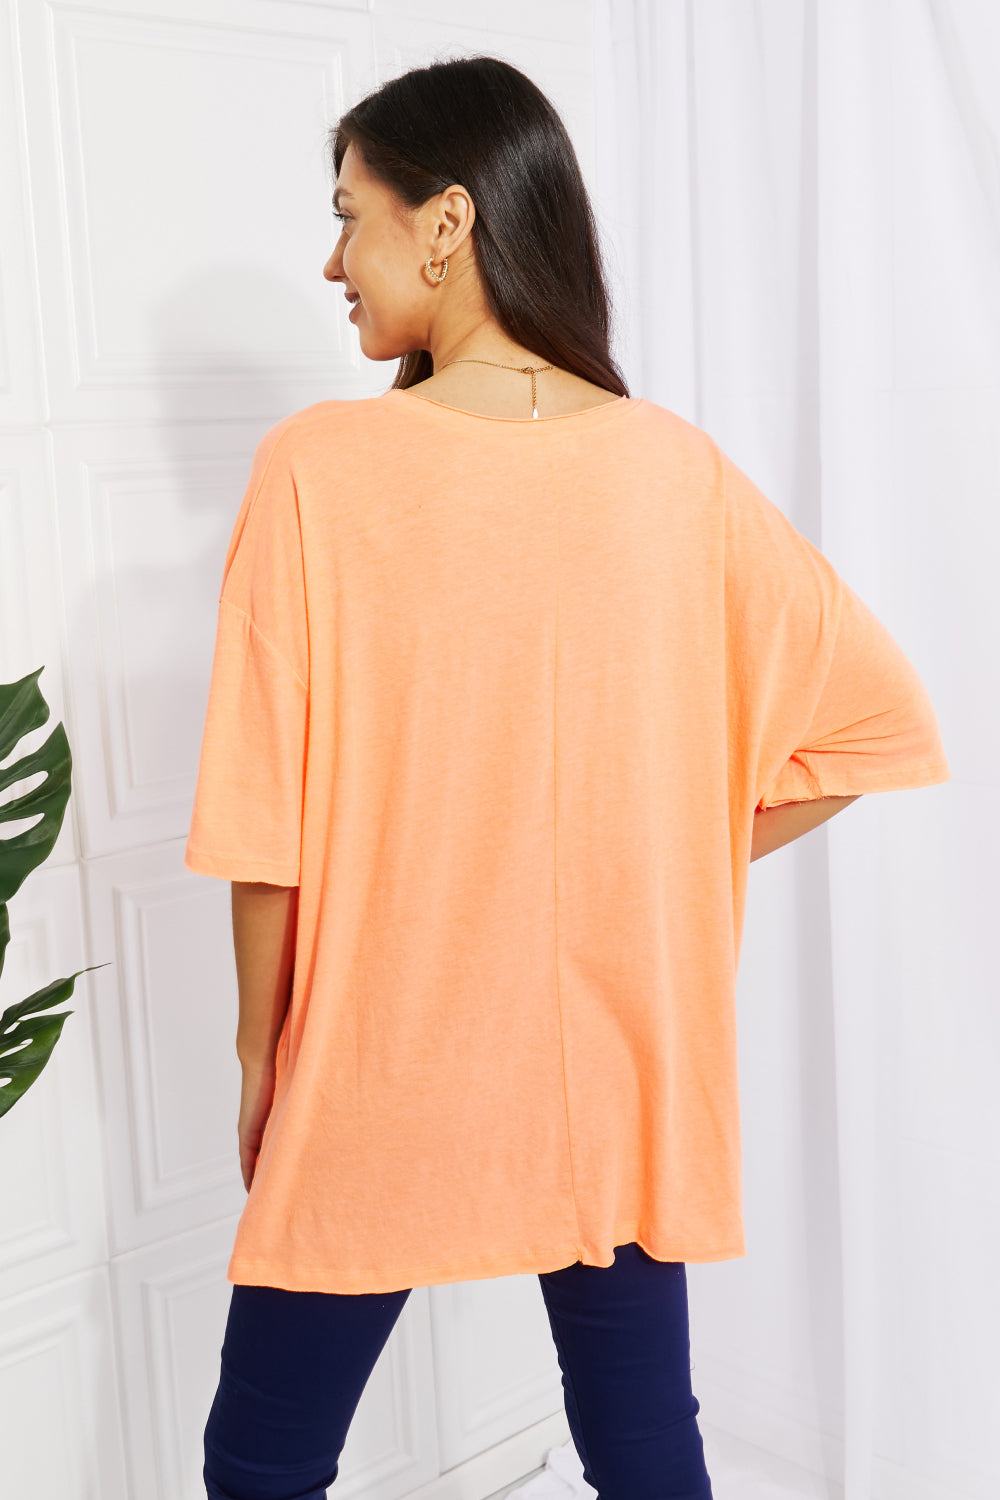 Zenana Neon Lights Raw Edge Pocket Tee in Coral  Southern Soul Collectives 